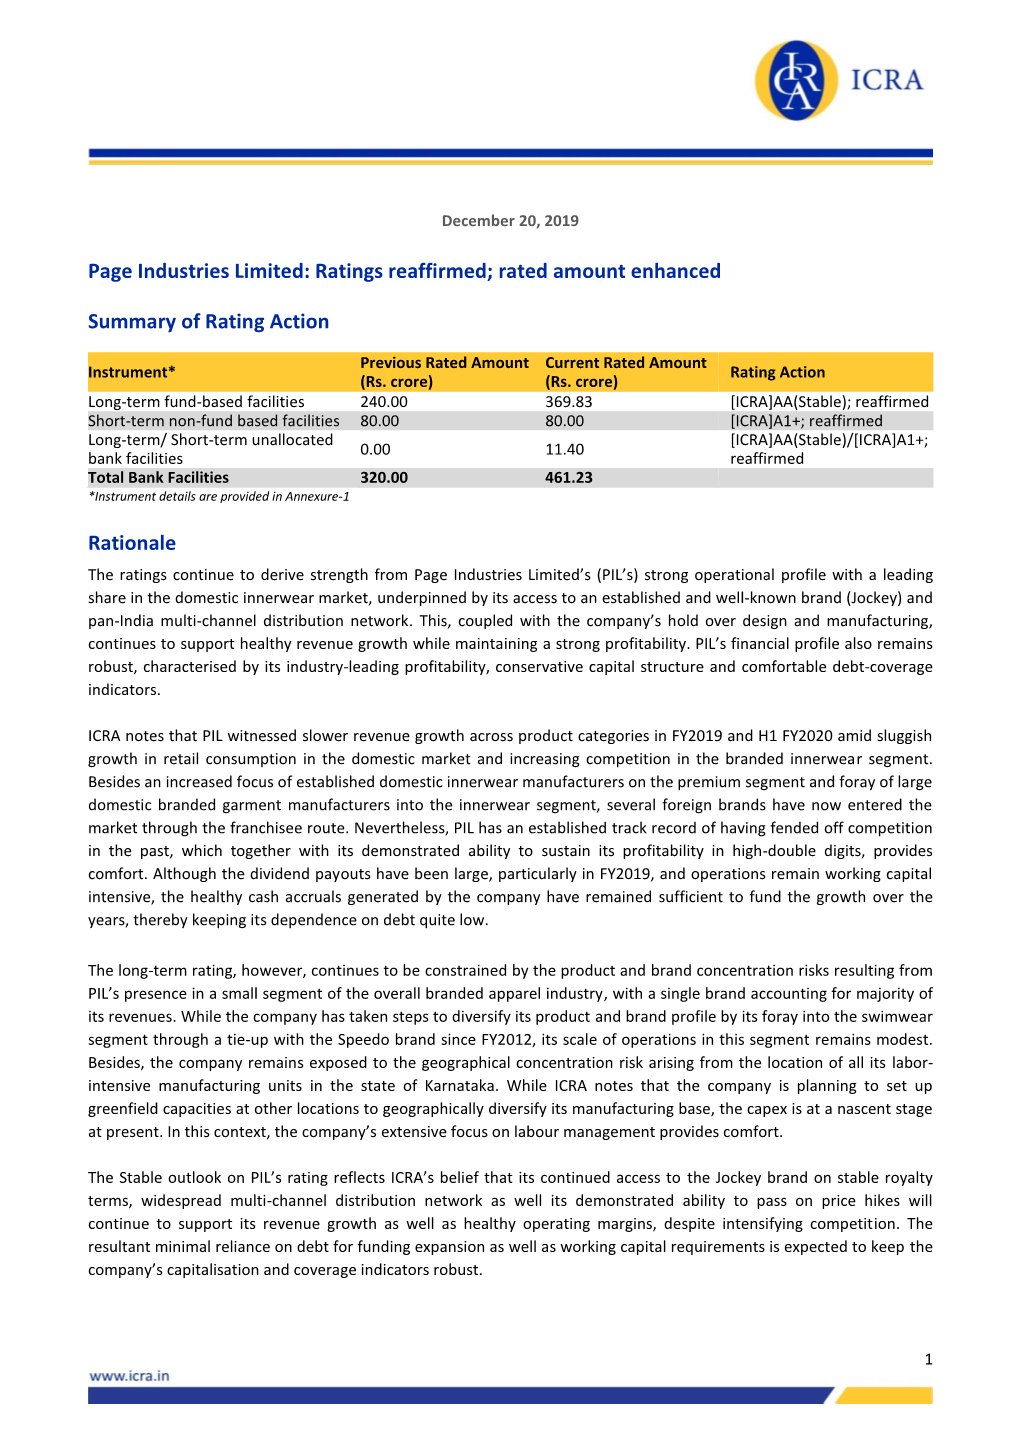 Page Industries Limited: Ratings Reaffirmed; Rated Amount Enhanced